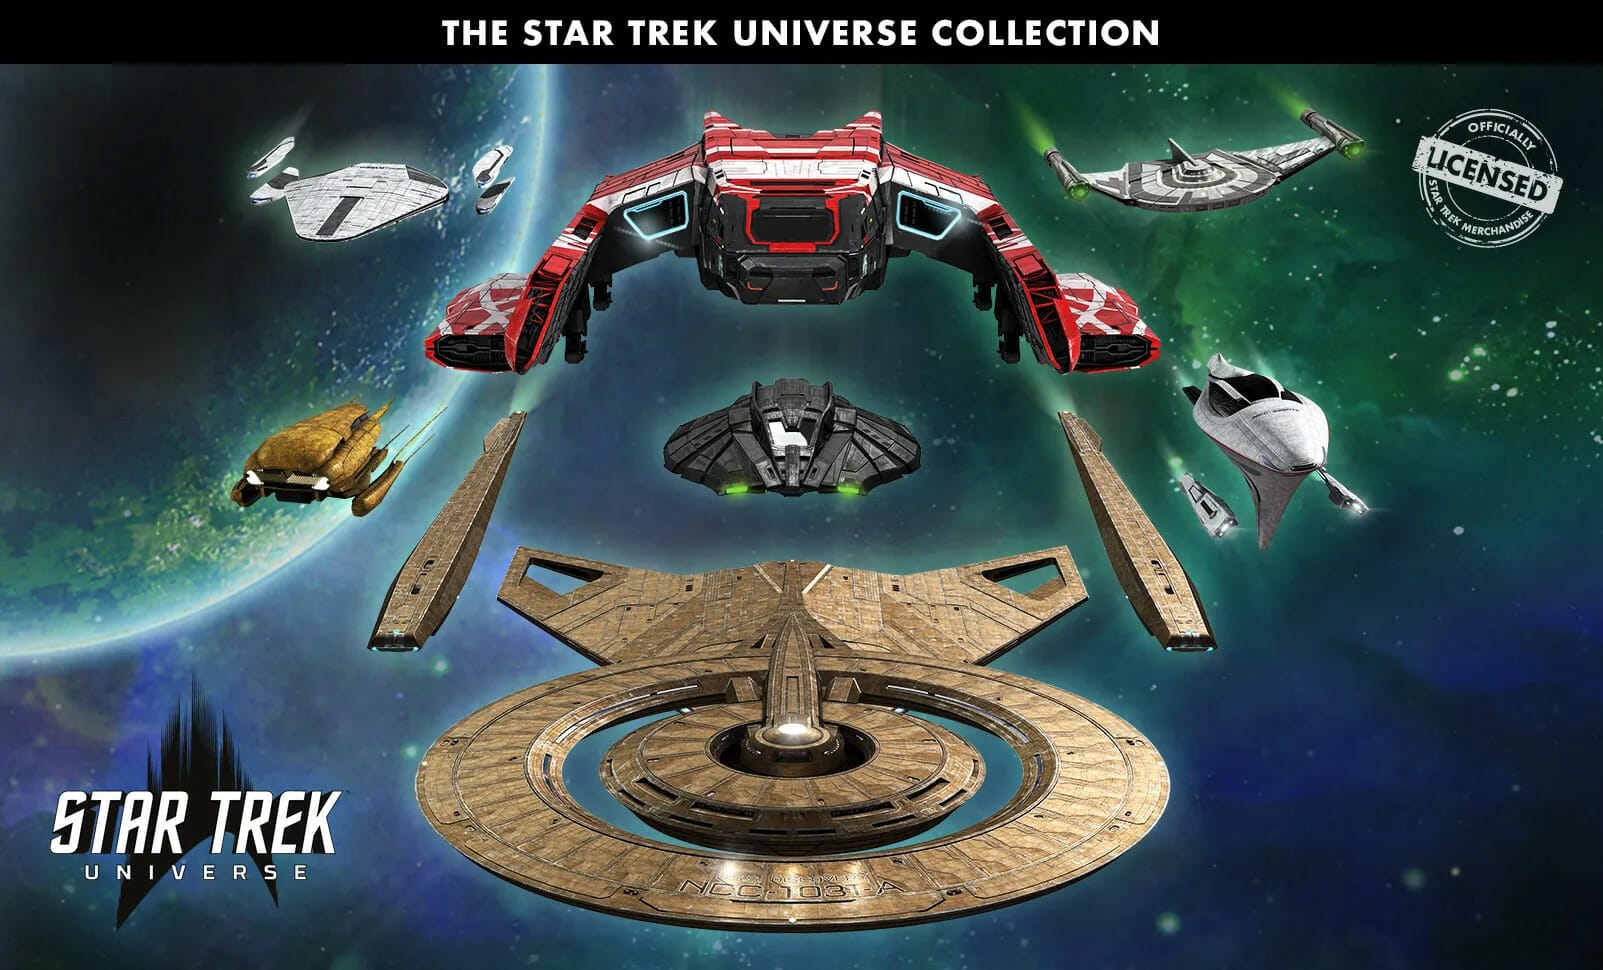 The Star Trek Universe Collection